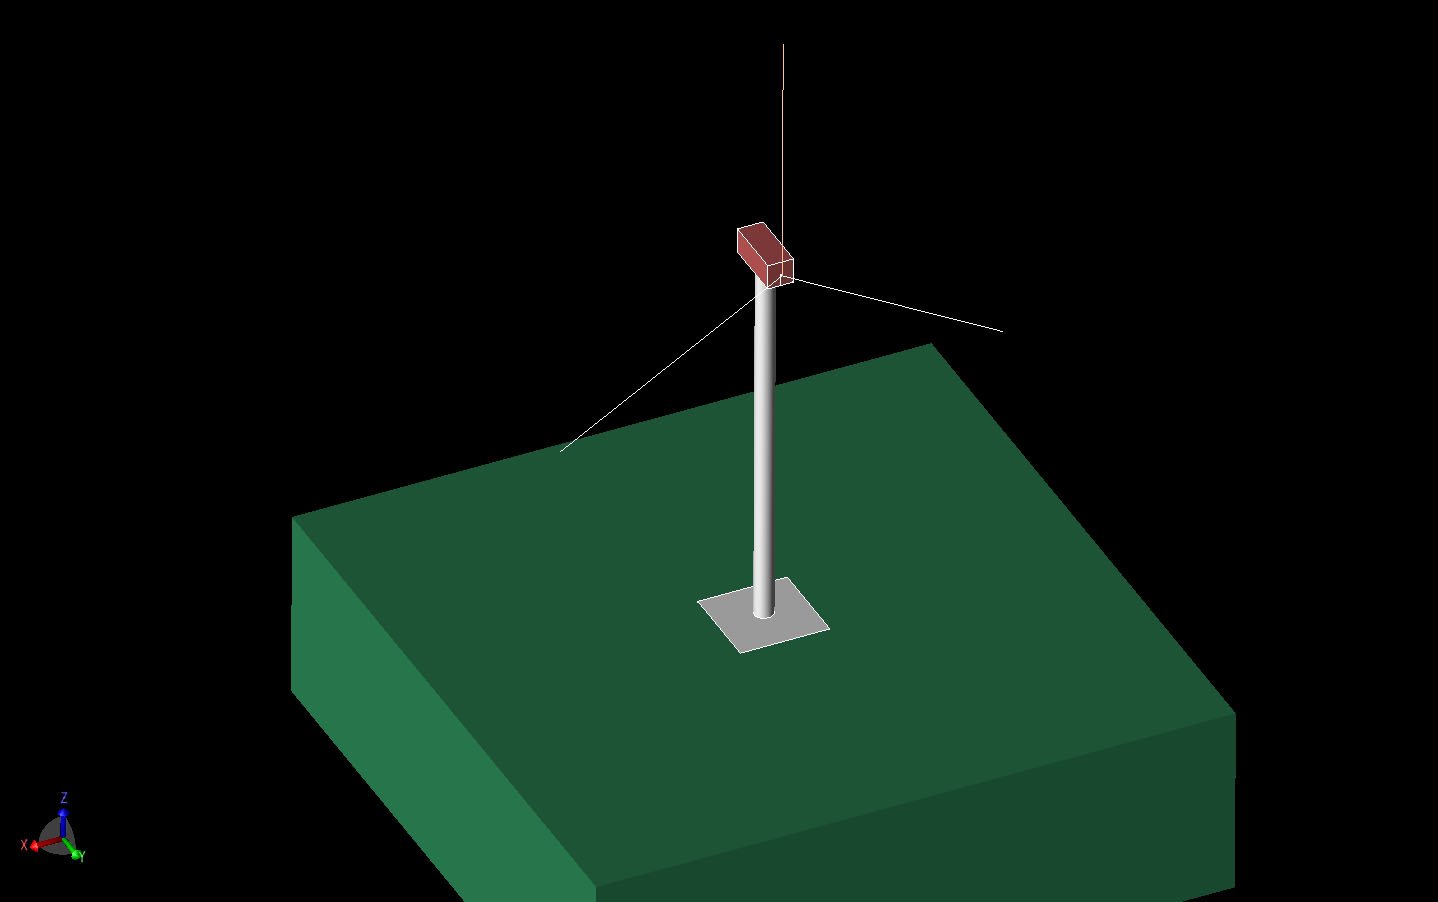 Figure 1Three-dimensional CAD view of the wind turbine tower above a lossy ground. The tower is 60 meters high with each blade 40 meters long. The vertical axis is Z and the long axis of the nacelle is Y.